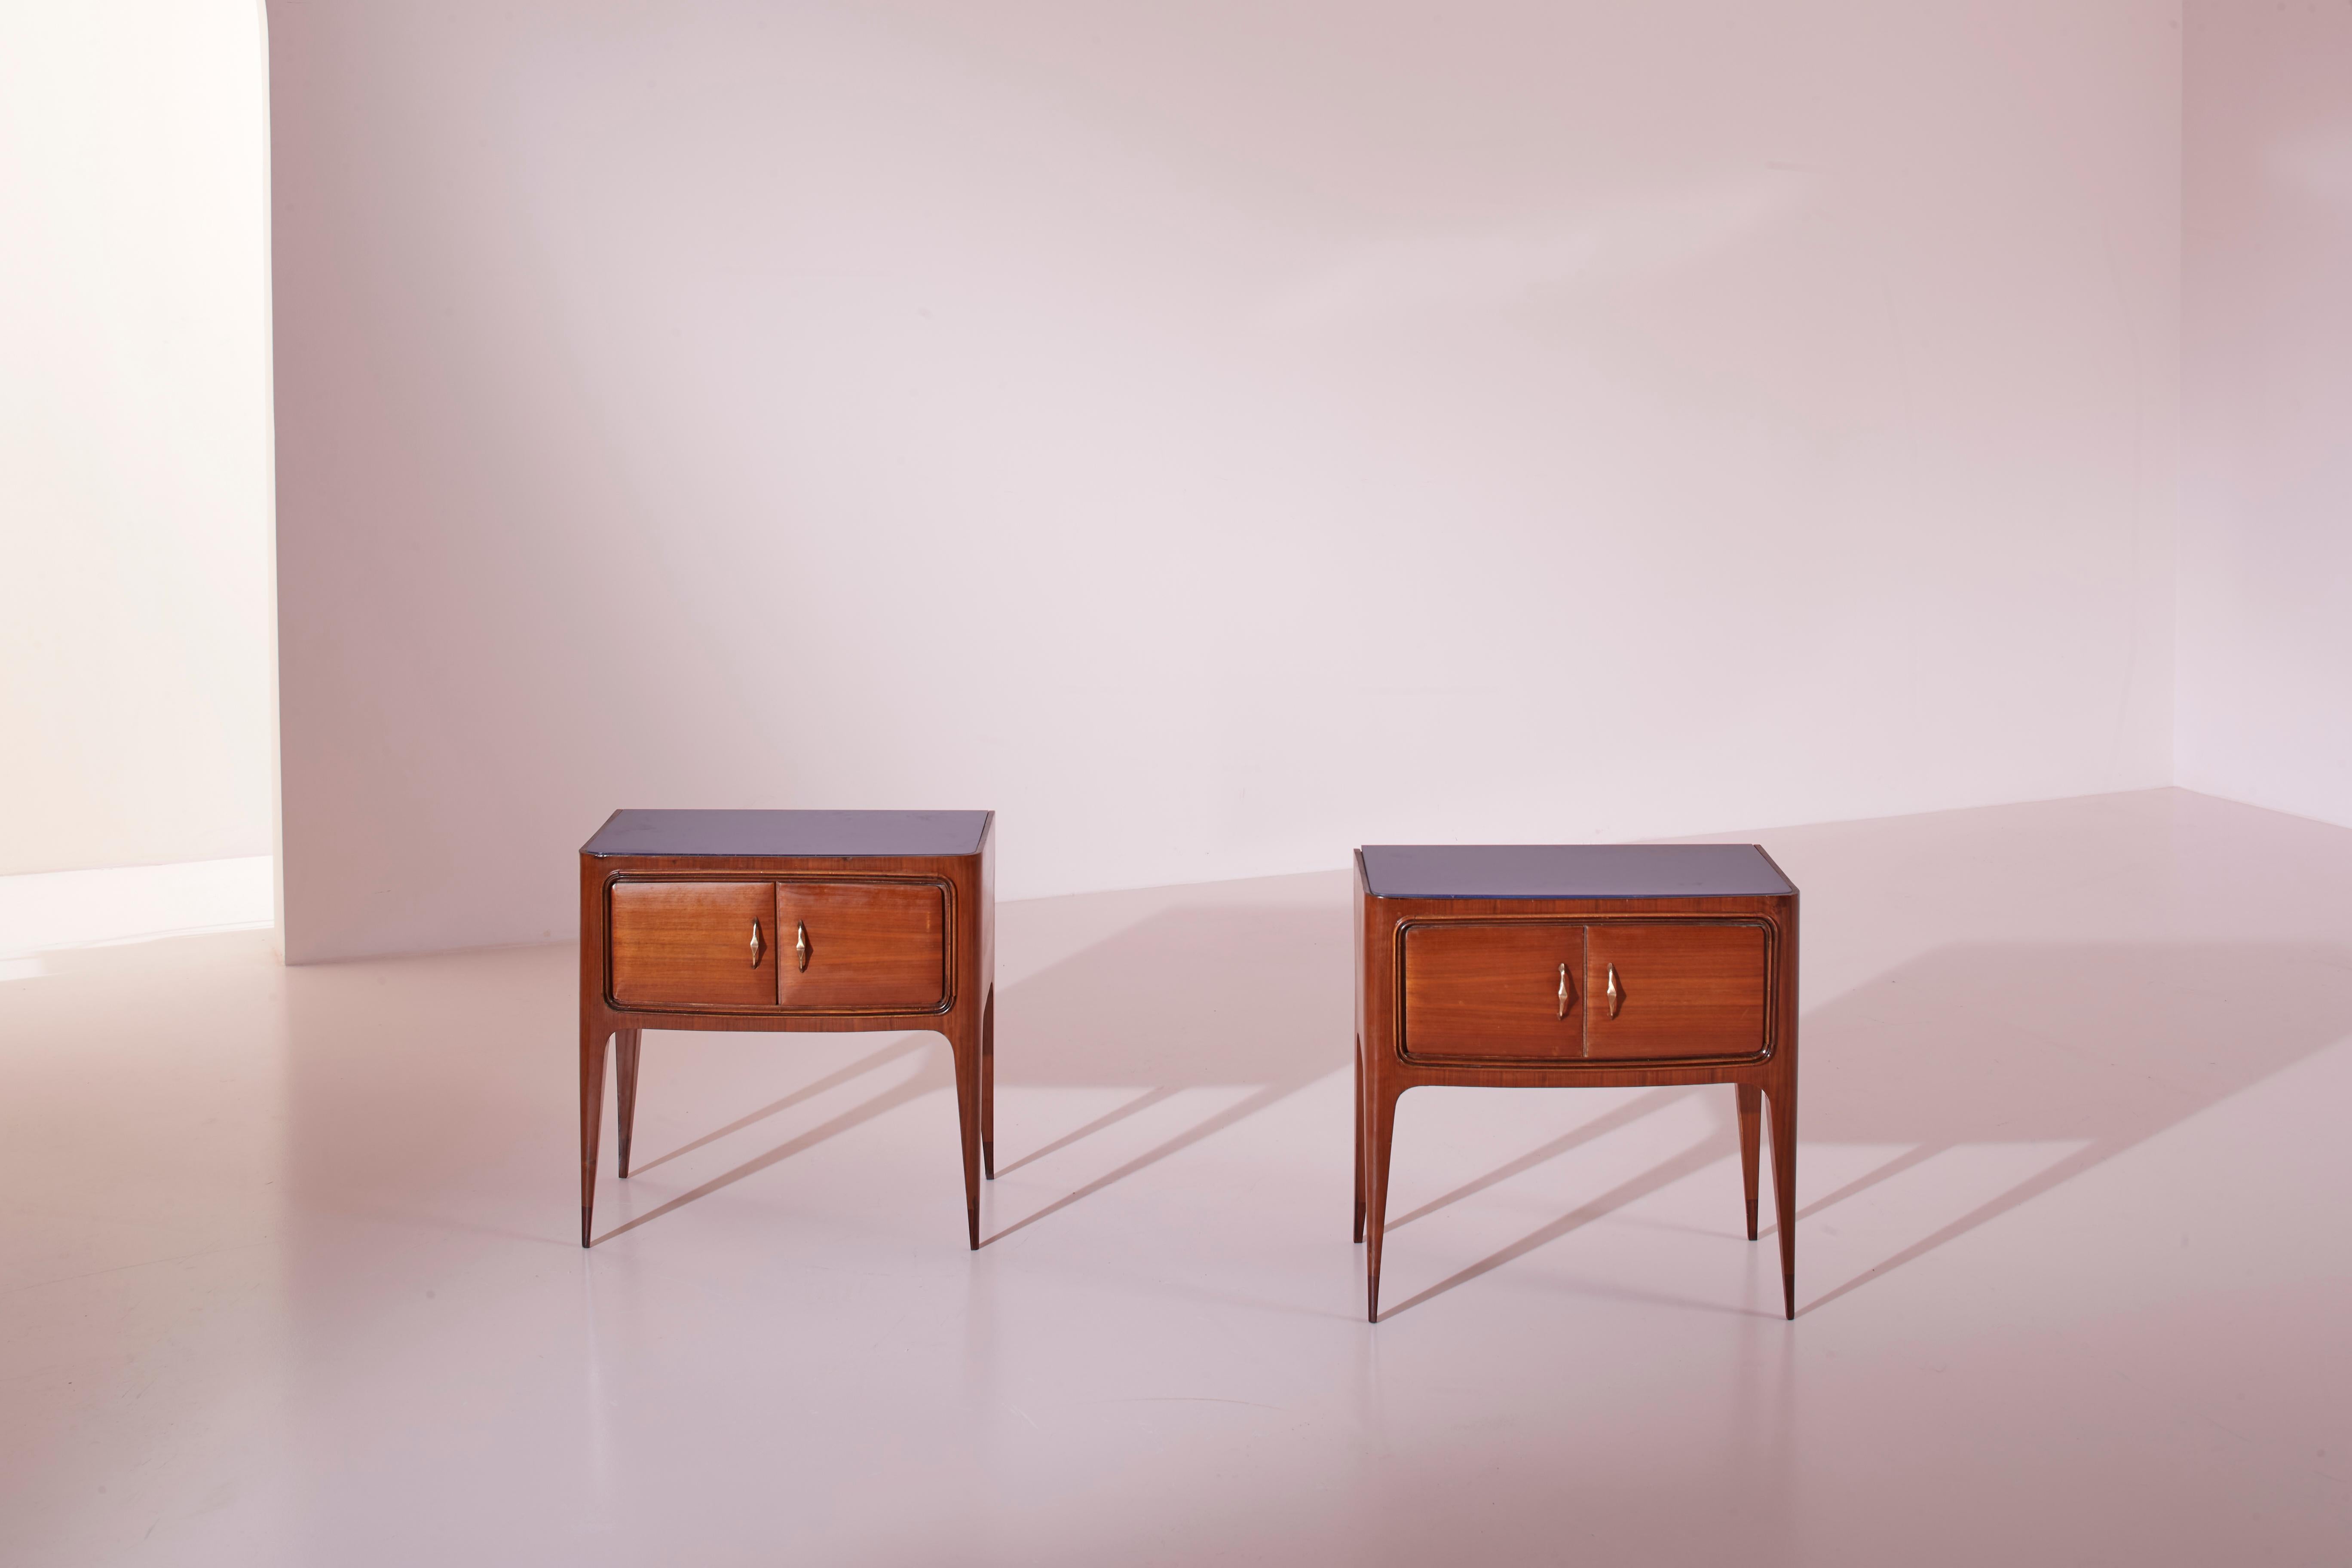 A pair of wooden and glass bedside tables, Italian craftsmanship from the 1950s, designed by Paolo Buffa.

Characterized by two small doors framed by delicate moldings, these Italian bedside tables from the 1950s showcase the finesse of Paolo